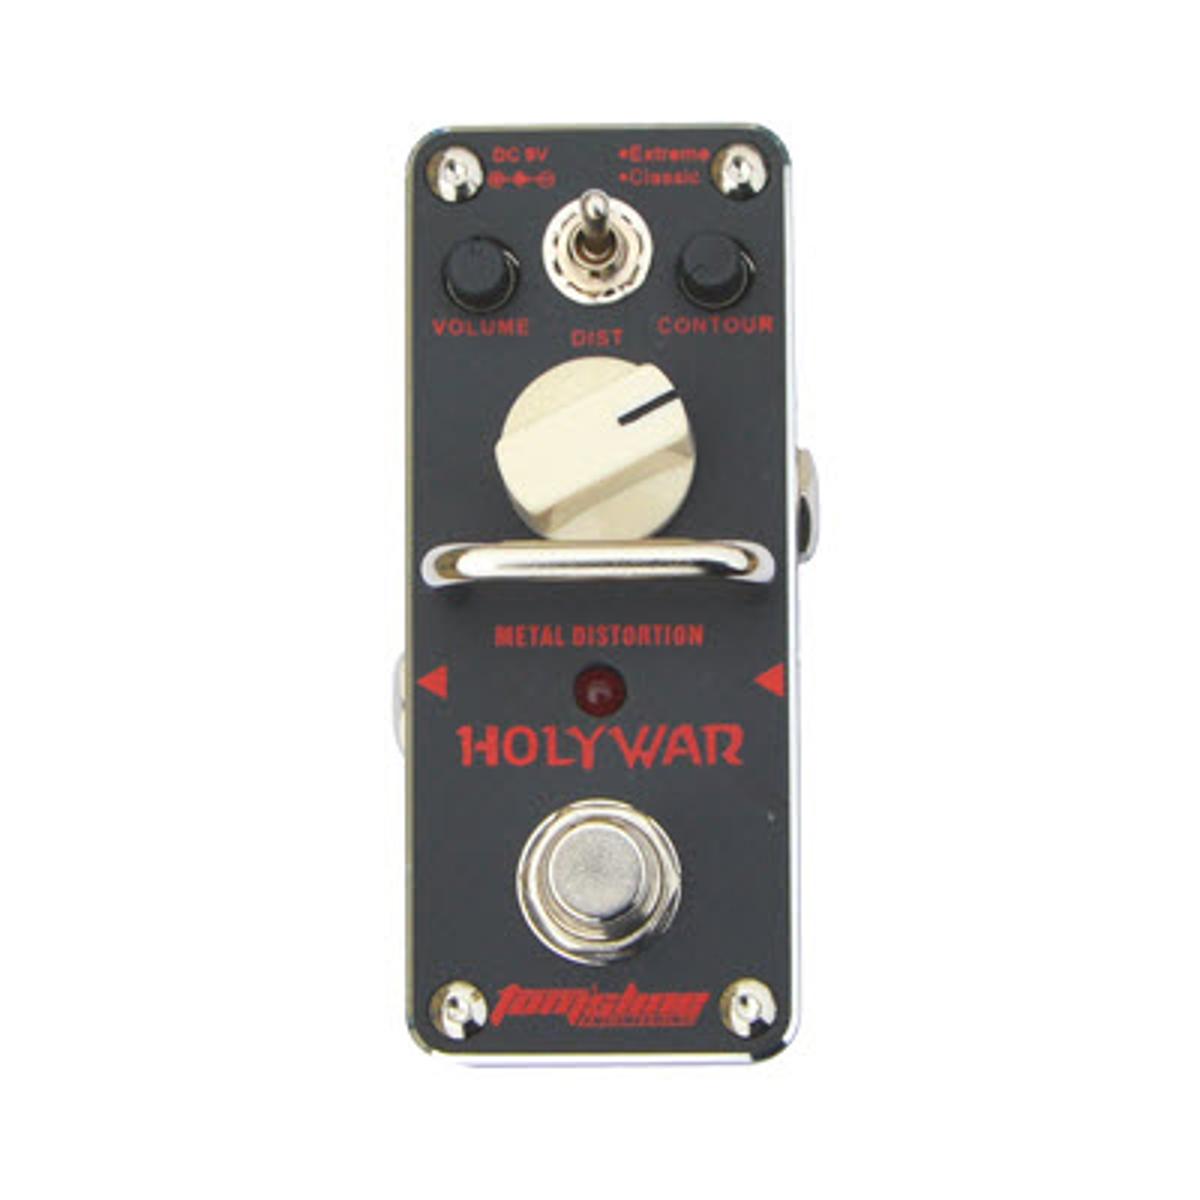 Toms Line AHOR-3 Holy War Metal Distortion Mini Effects Pedal